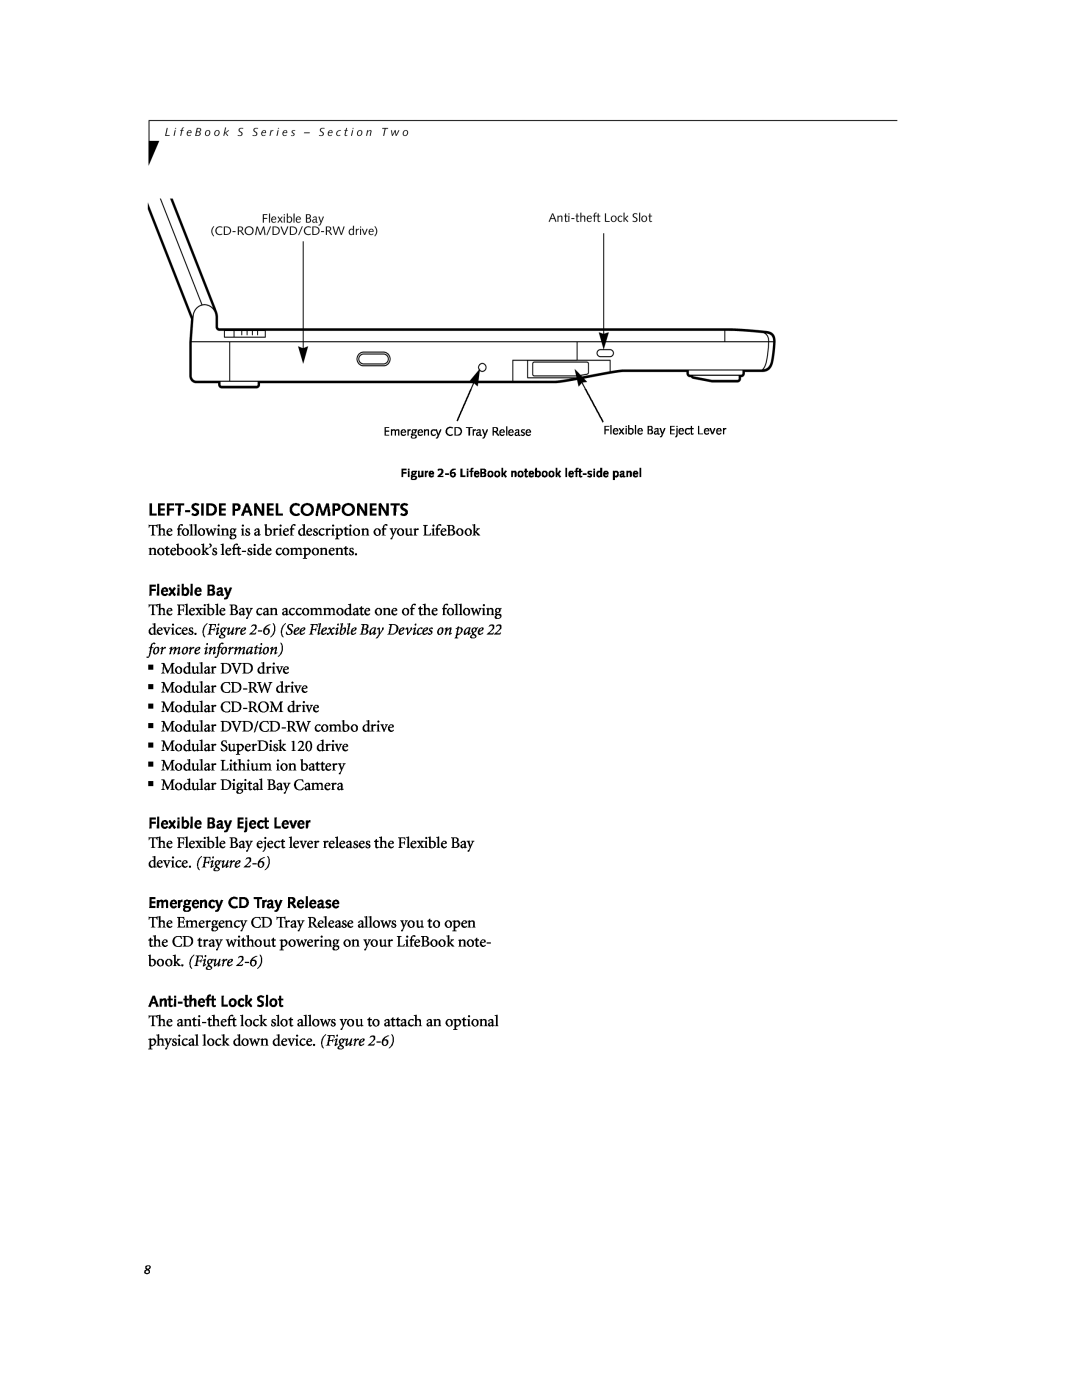 Fujitsu DVD Player manual Left-Side Panel Components, Flexible Bay Eject Lever, Emergency CD Tray Release 